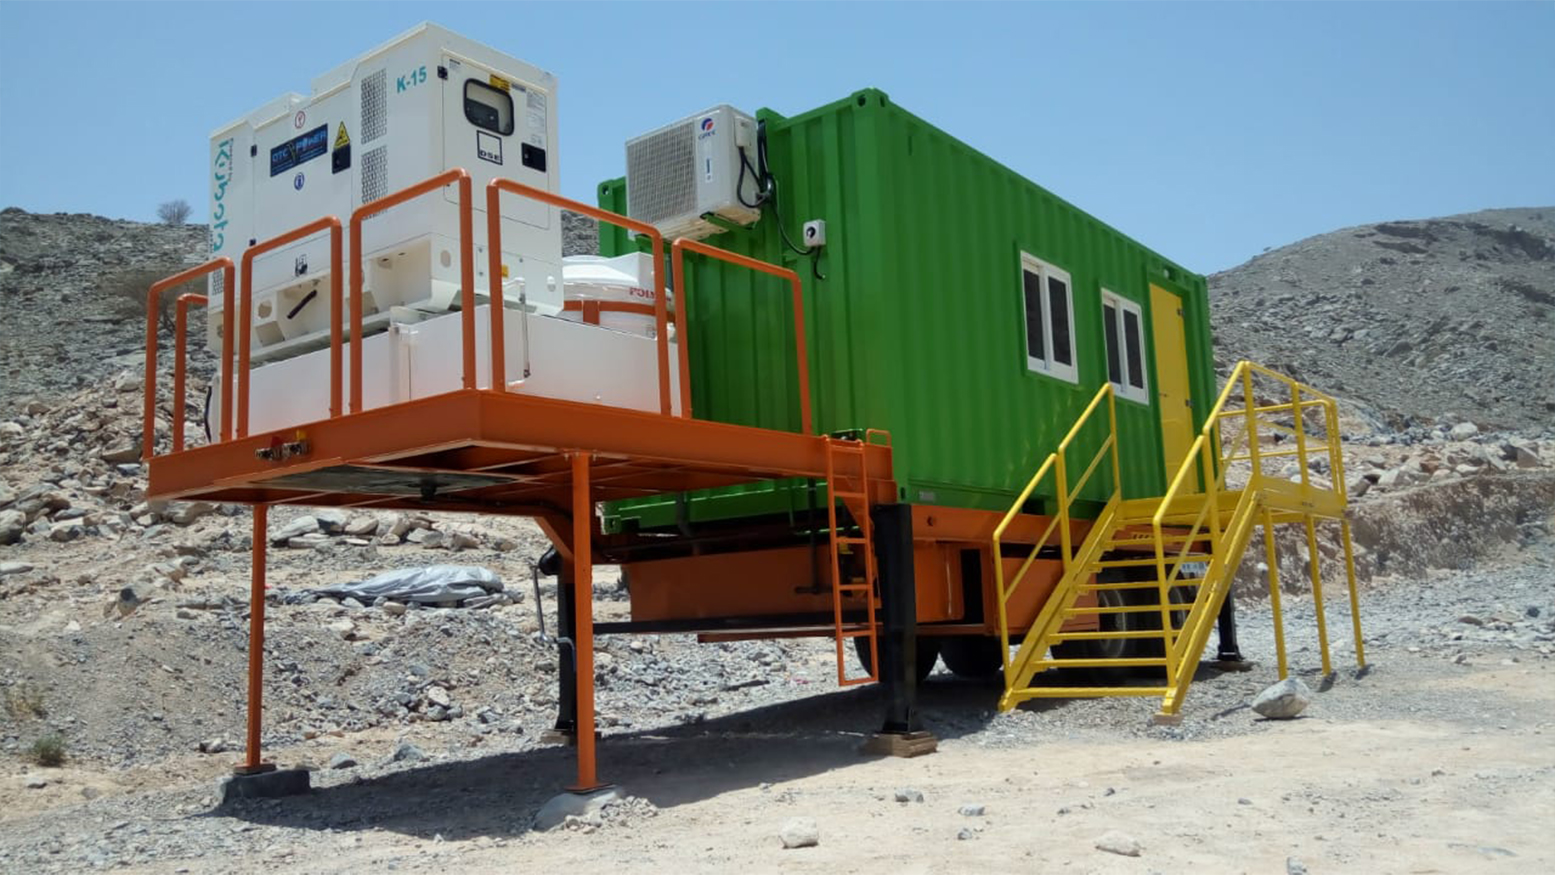 Security outpost container conversion